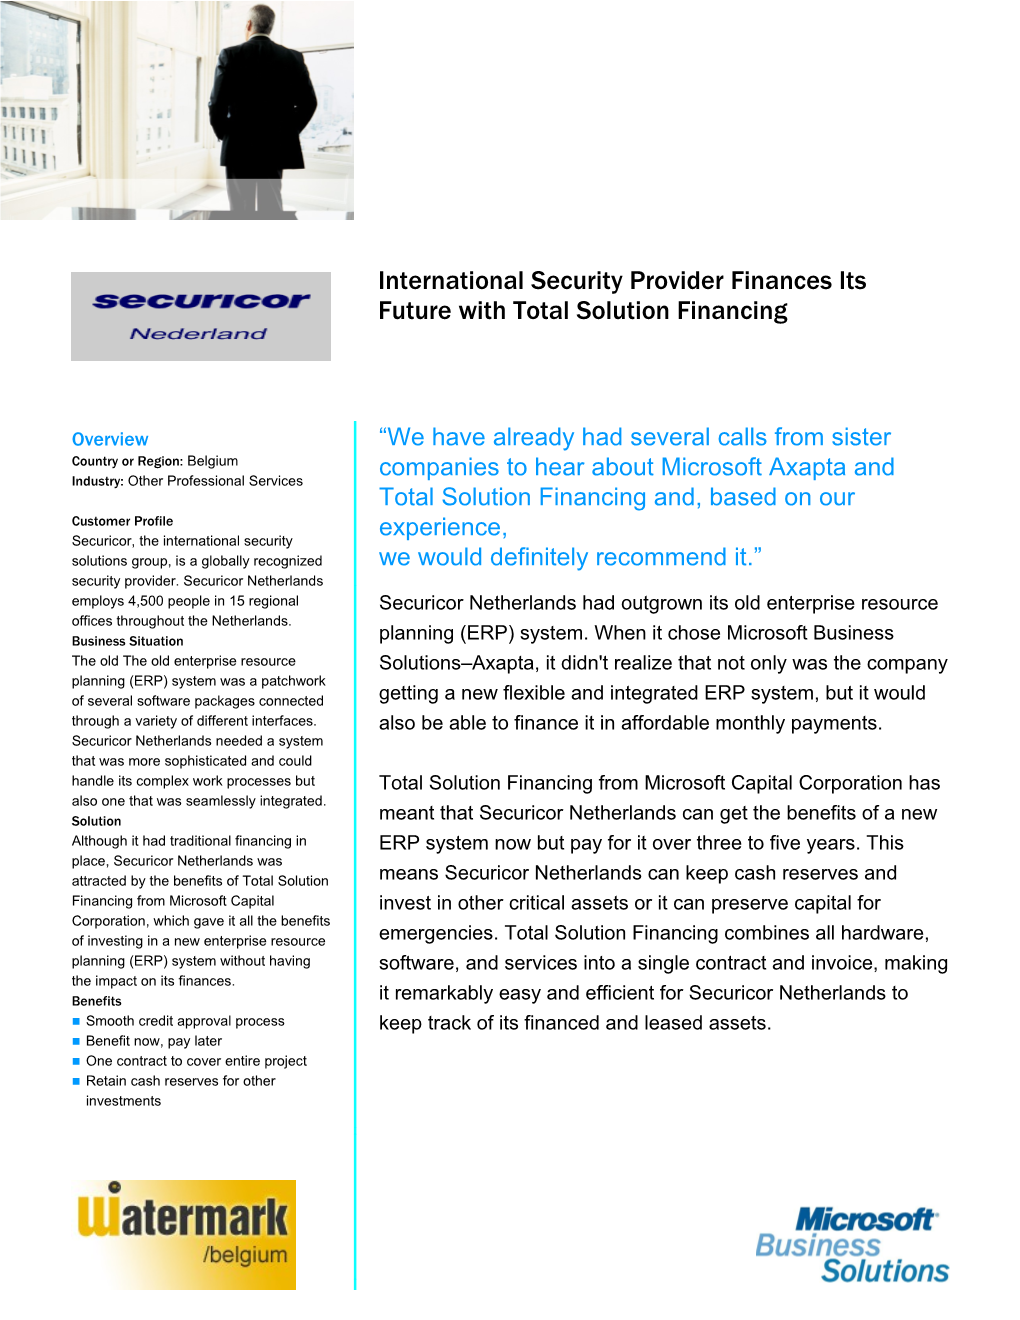 International Security Provider Finances Its Future with Total Solution Financing